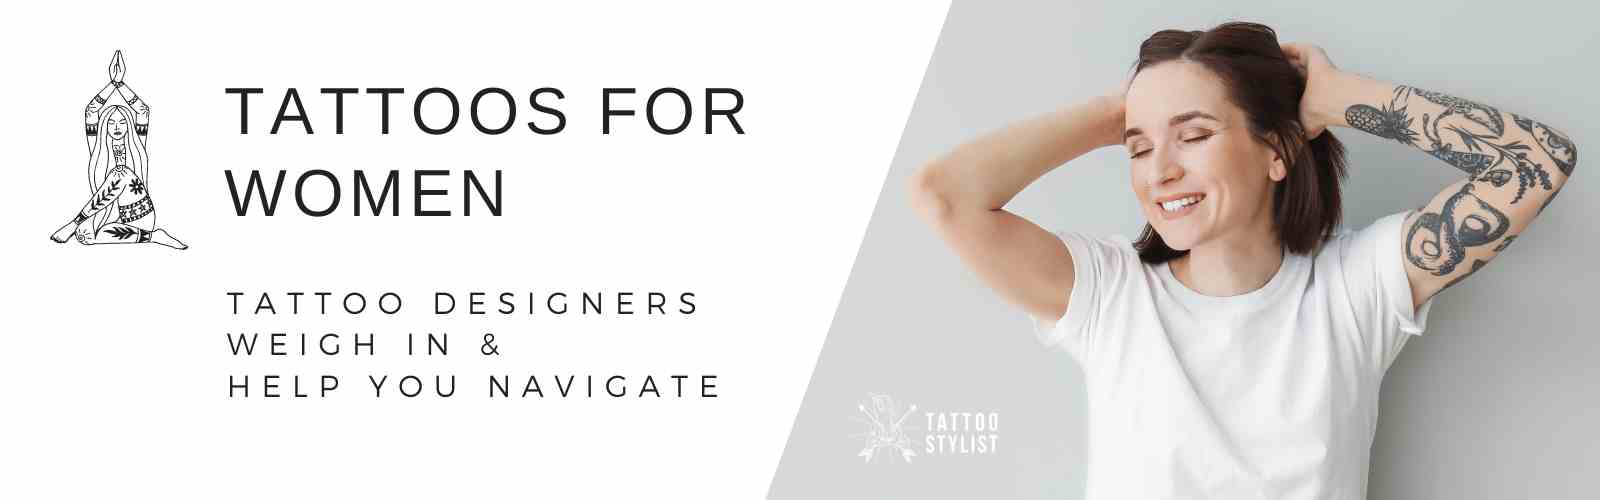 tattoos for women featured image